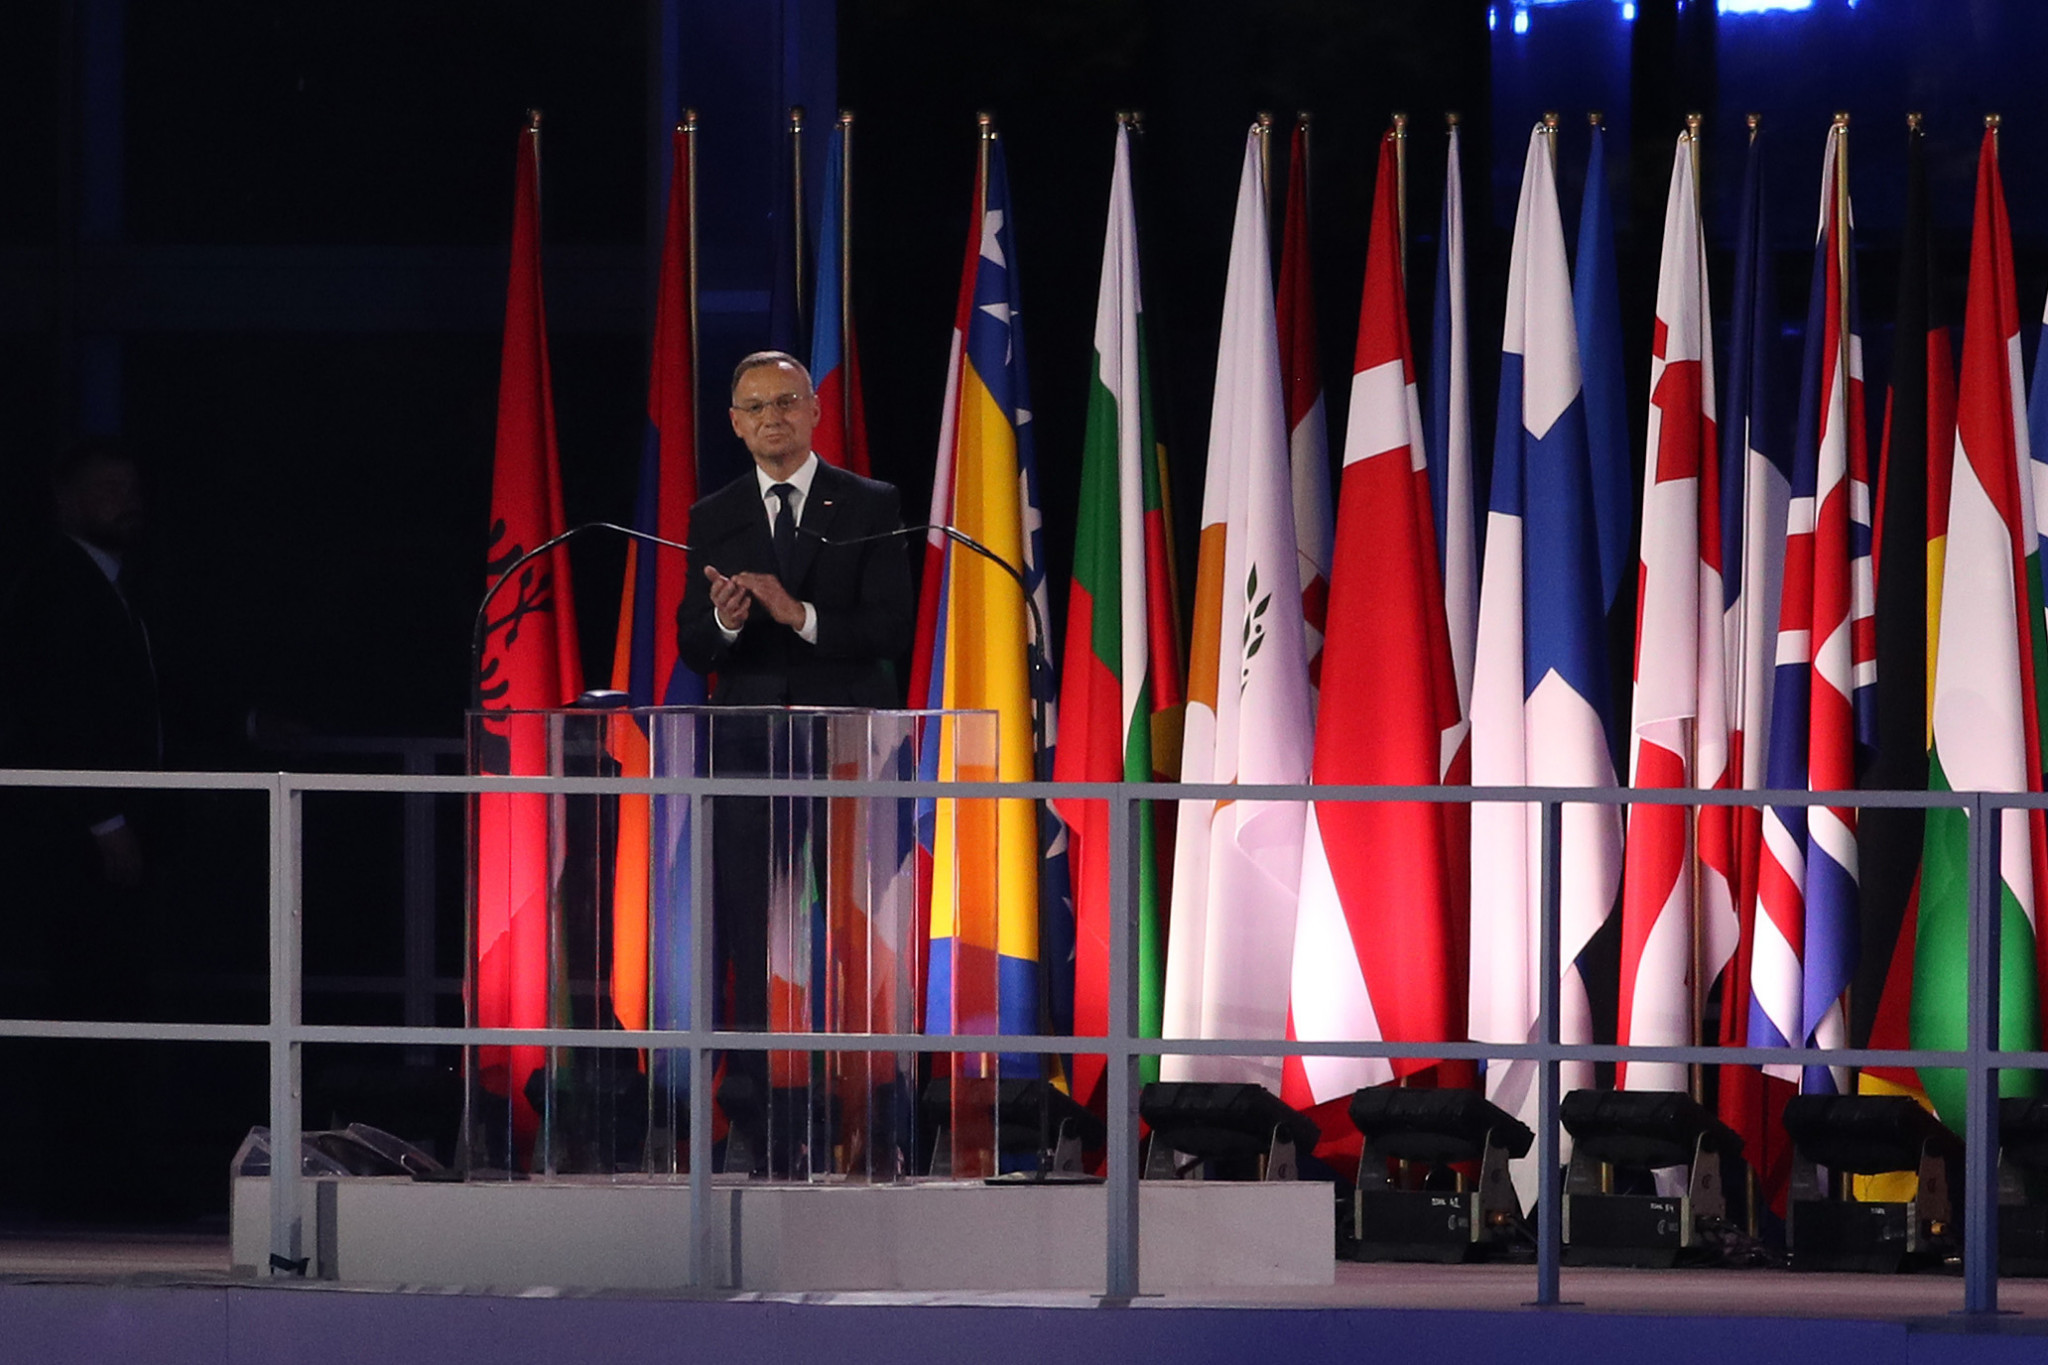 Polish President  faced some hostility as he made his way to the stage to open the European Games ©Kraków-Małopolska 2023